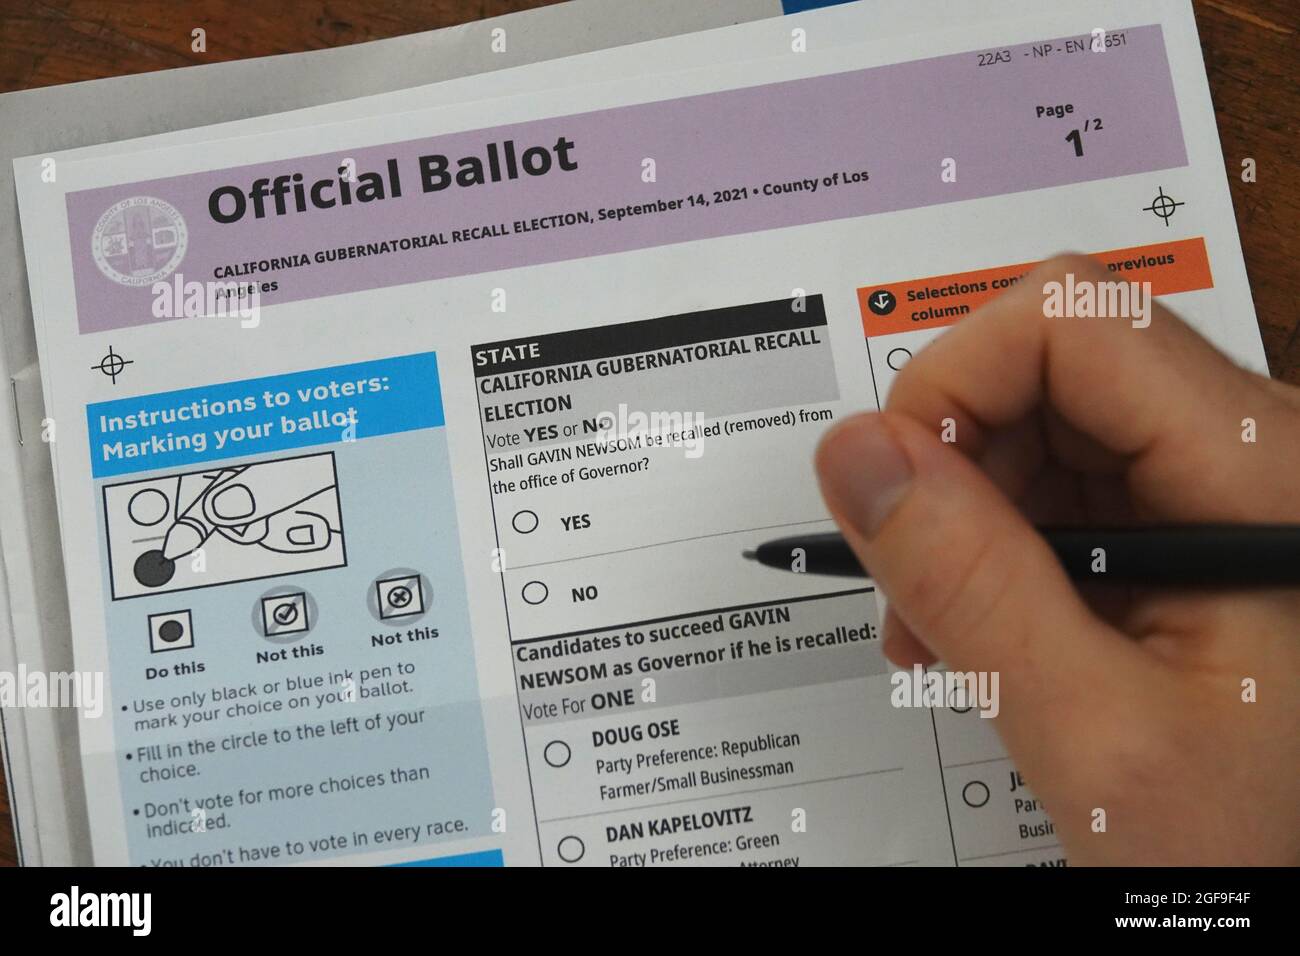 Los Angeles, CA / USA - Aug. 24, 2021: An official mail-in ballot for the 2021 California Gubernatorial Recall Election is shown. Stock Photo